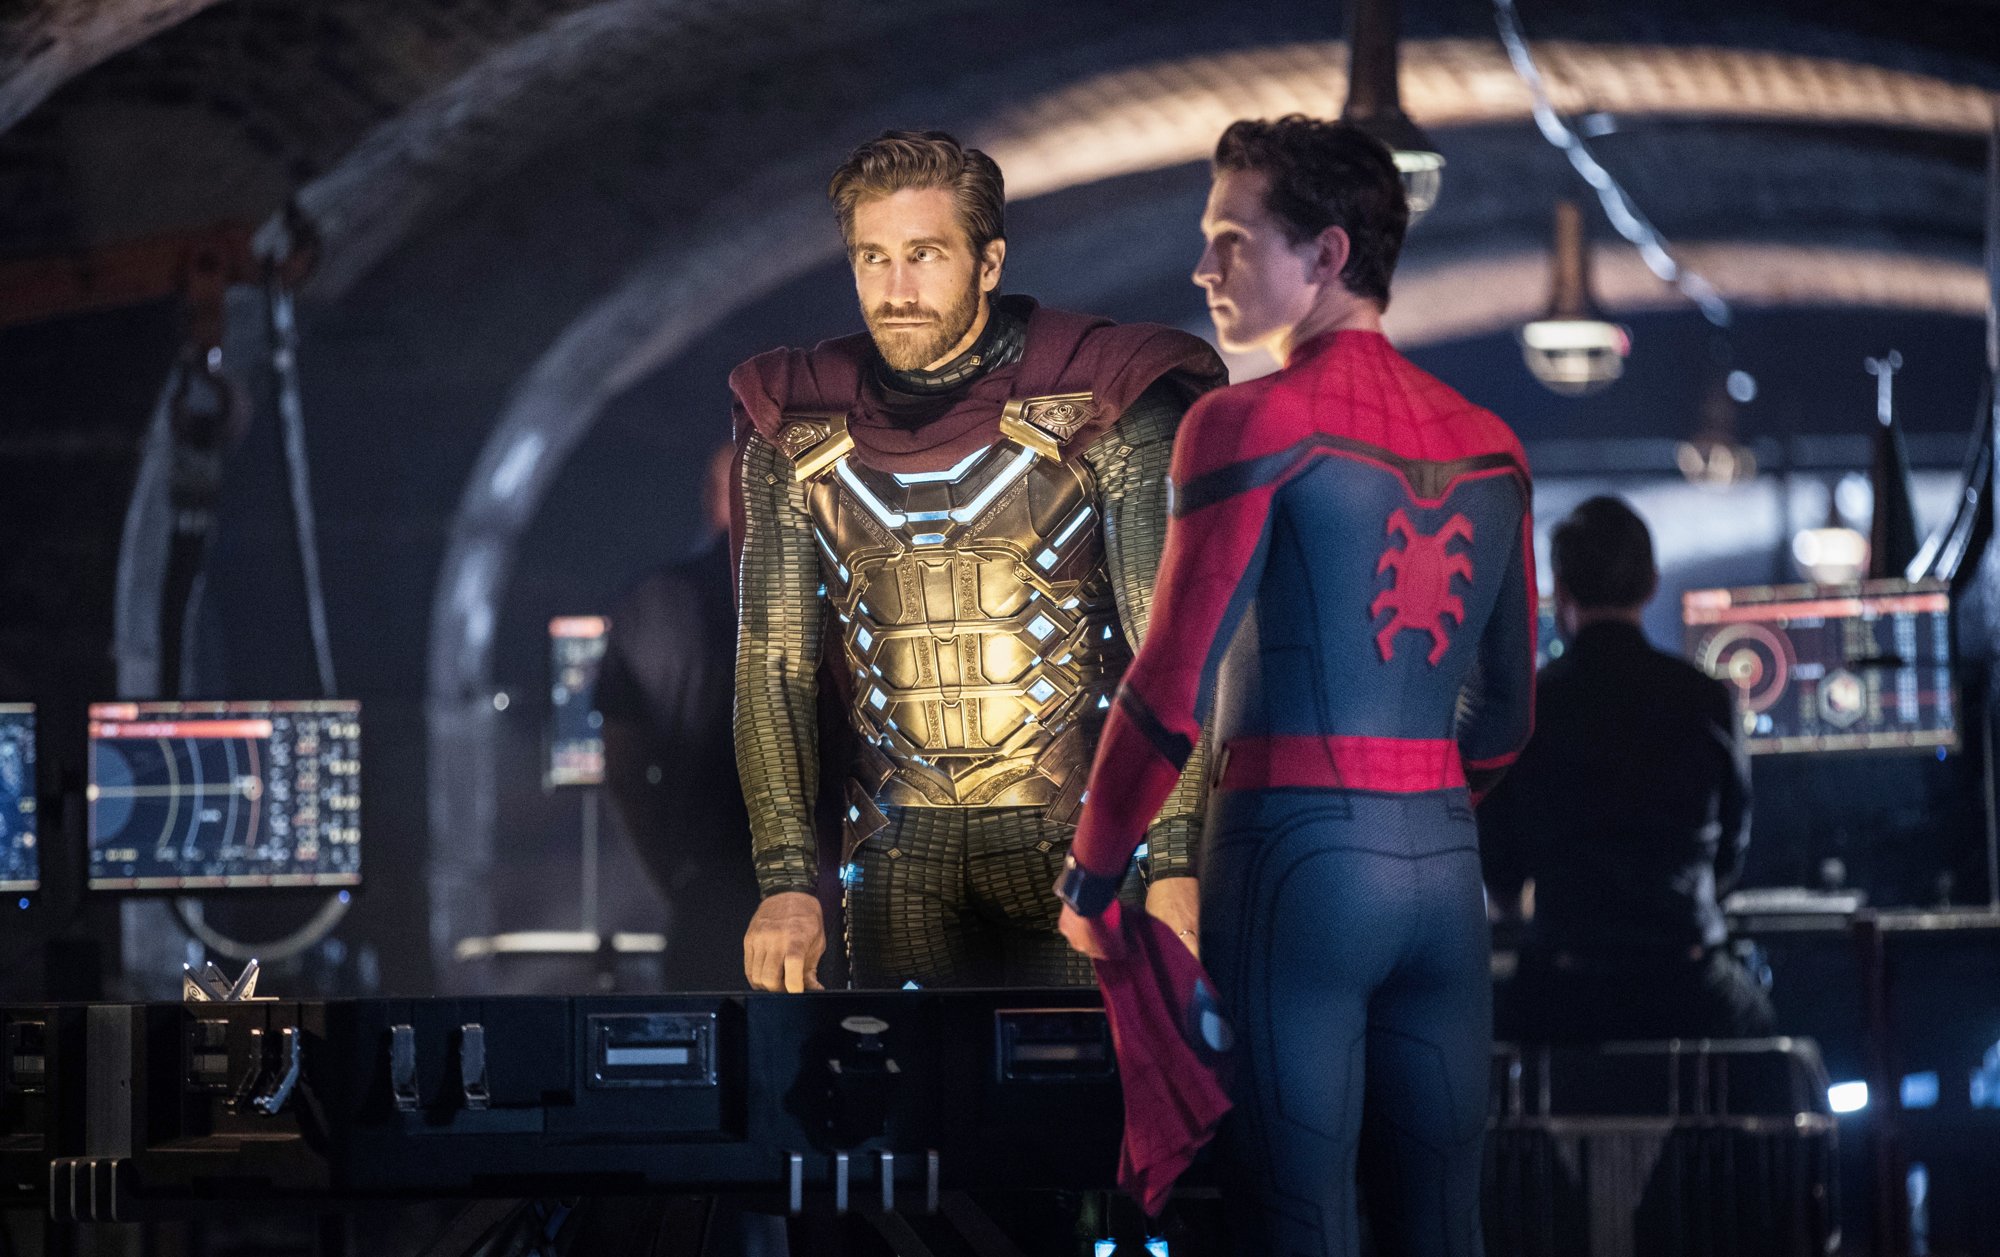 Jake Gyllenhaal stars as Quentin Beck/Mysterio and Tom Holland stars as Peter Parker/Spider-Man in Sony Pictures' Spider-Man: Far From Home (2019)